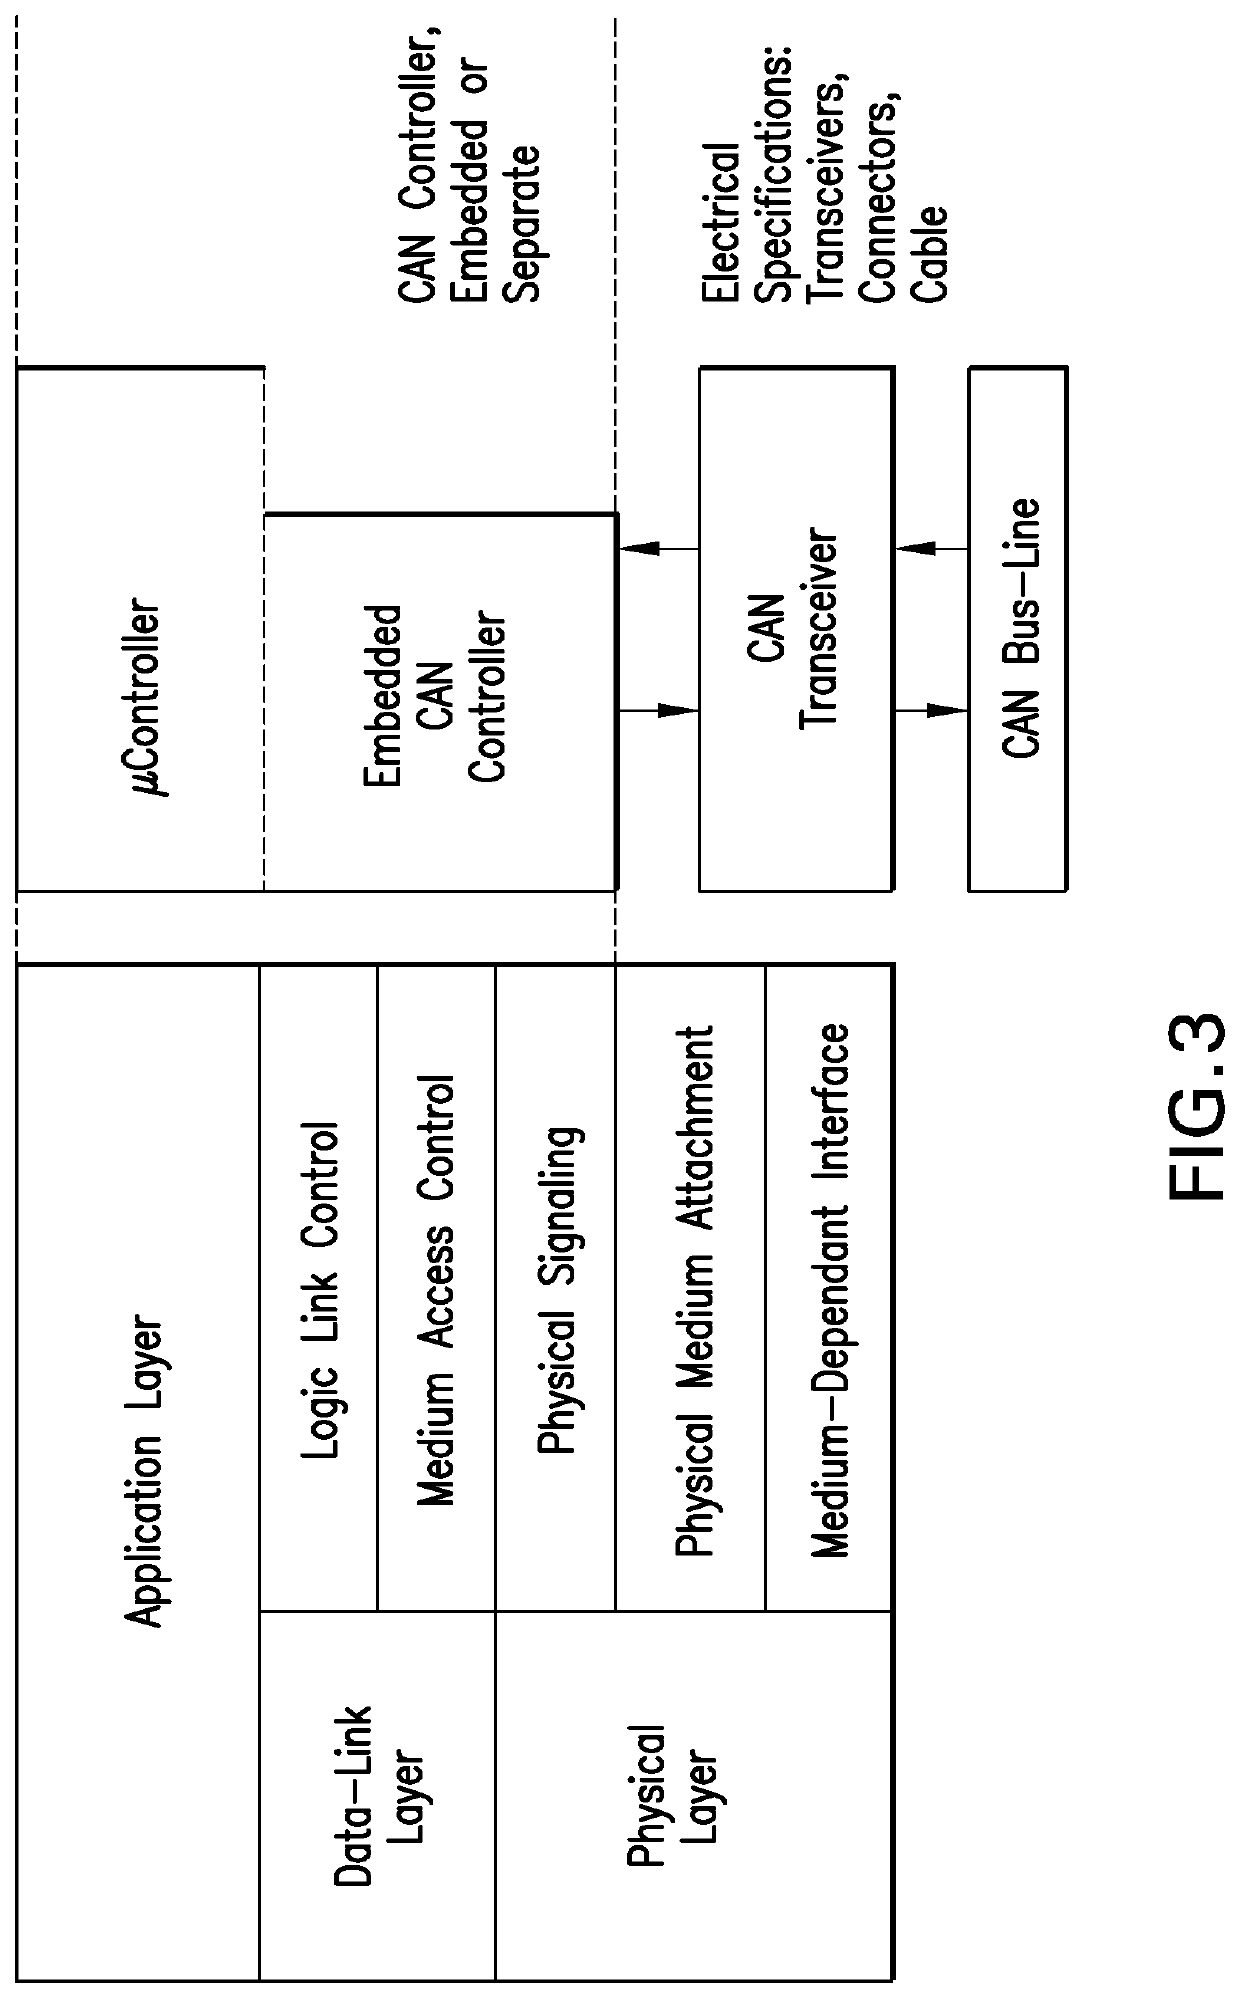 Hardware module-based authentication in intra-vehicle networks